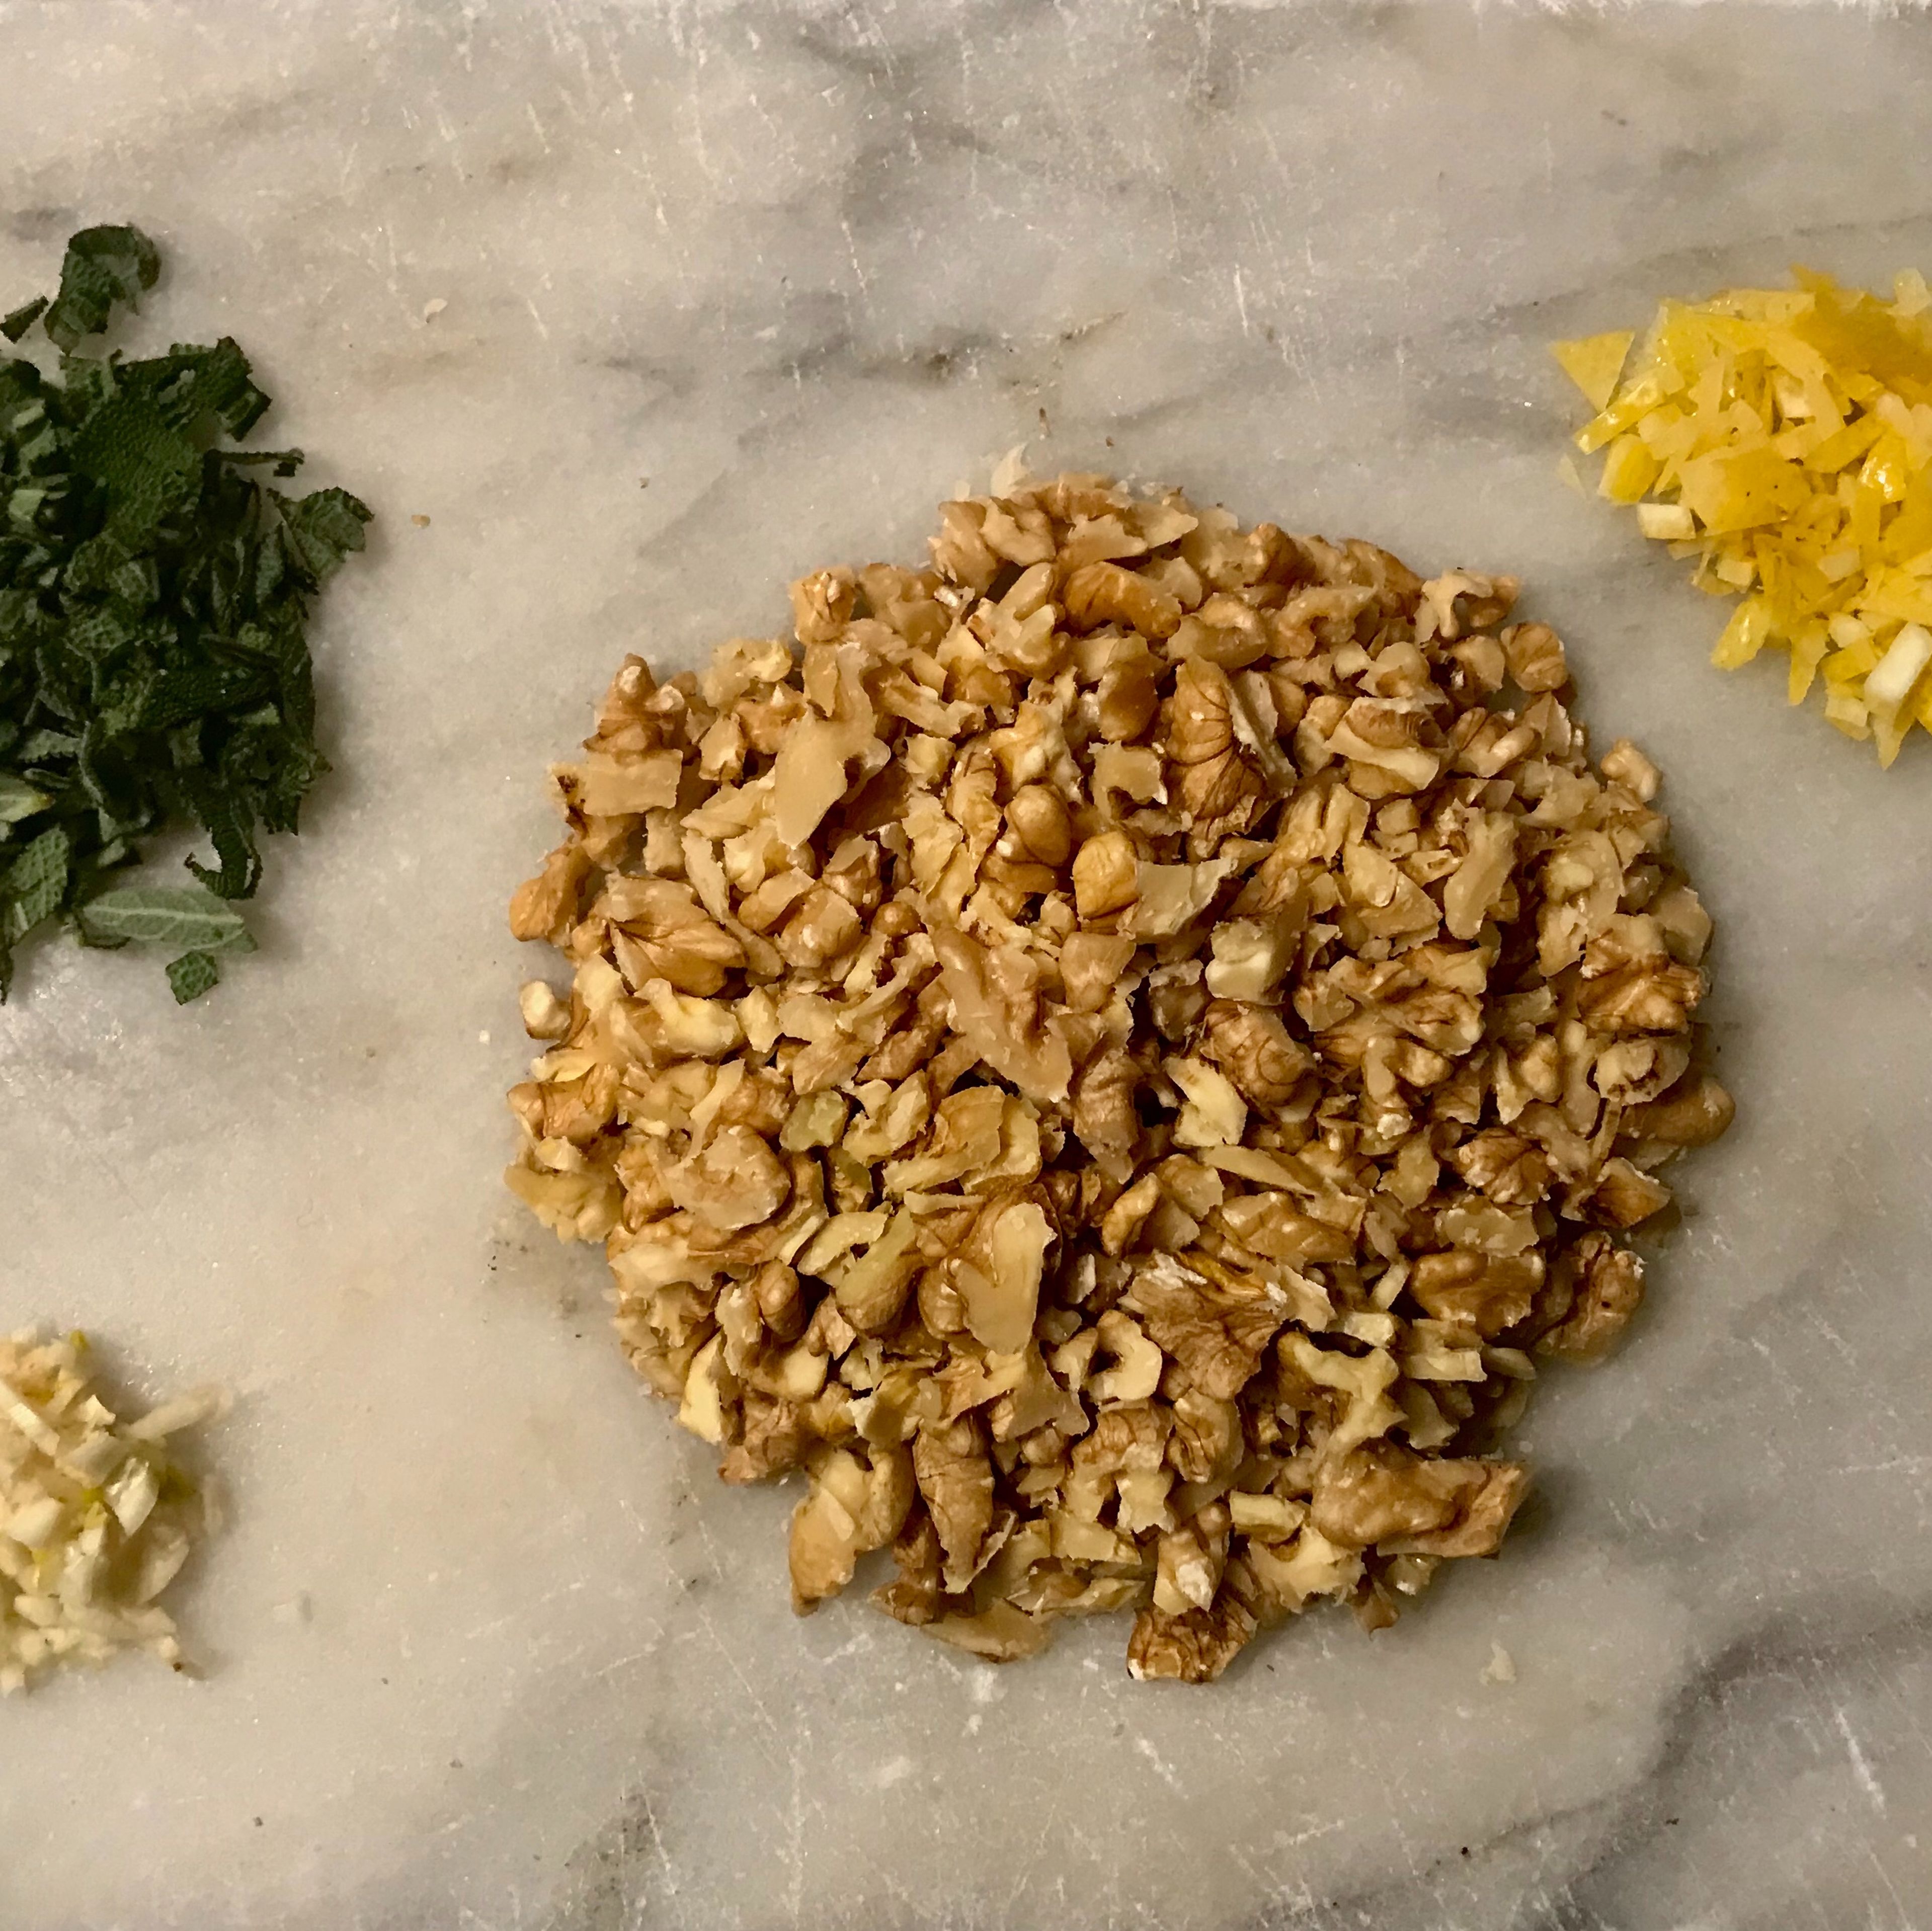 Chop the walnuts, garlic clove and sage leafs. Zest the lemon and cut the zest into thin slices.